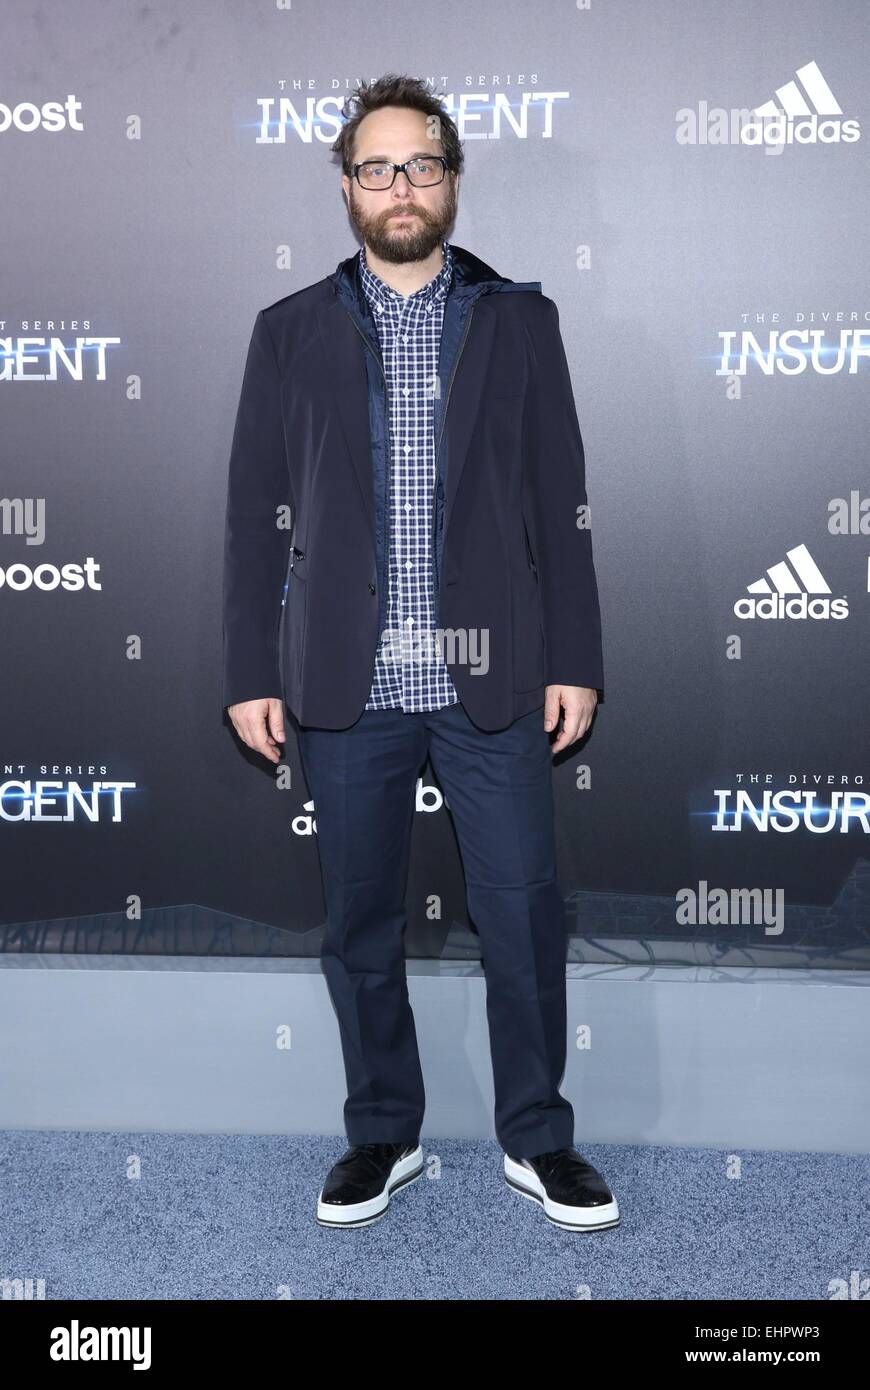 New York, NY, USA. 16th Mar, 2015. Robert Schwentke at arrivals for THE DIVERGENT SERIES: INSURGENT Premiere, Ziegfeld Theatre, New York, NY March 16, 2015. Credit:  Andres Otero/Everett Collection/Alamy Live News Stock Photo